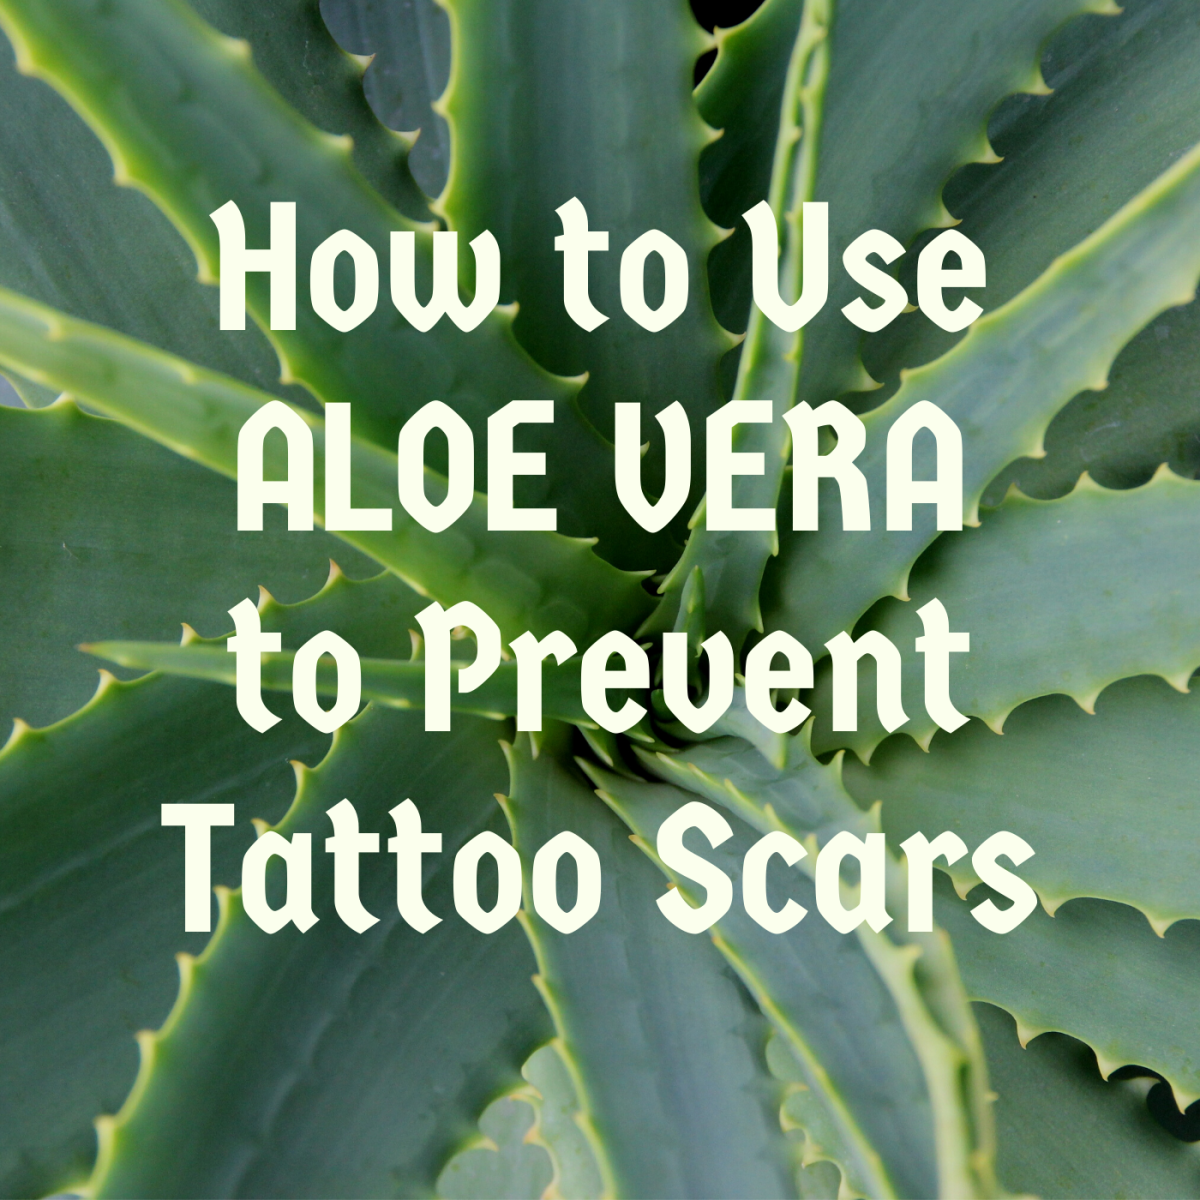 How to Minimize and Prevent Tattoo Scarring With Aloe Vera